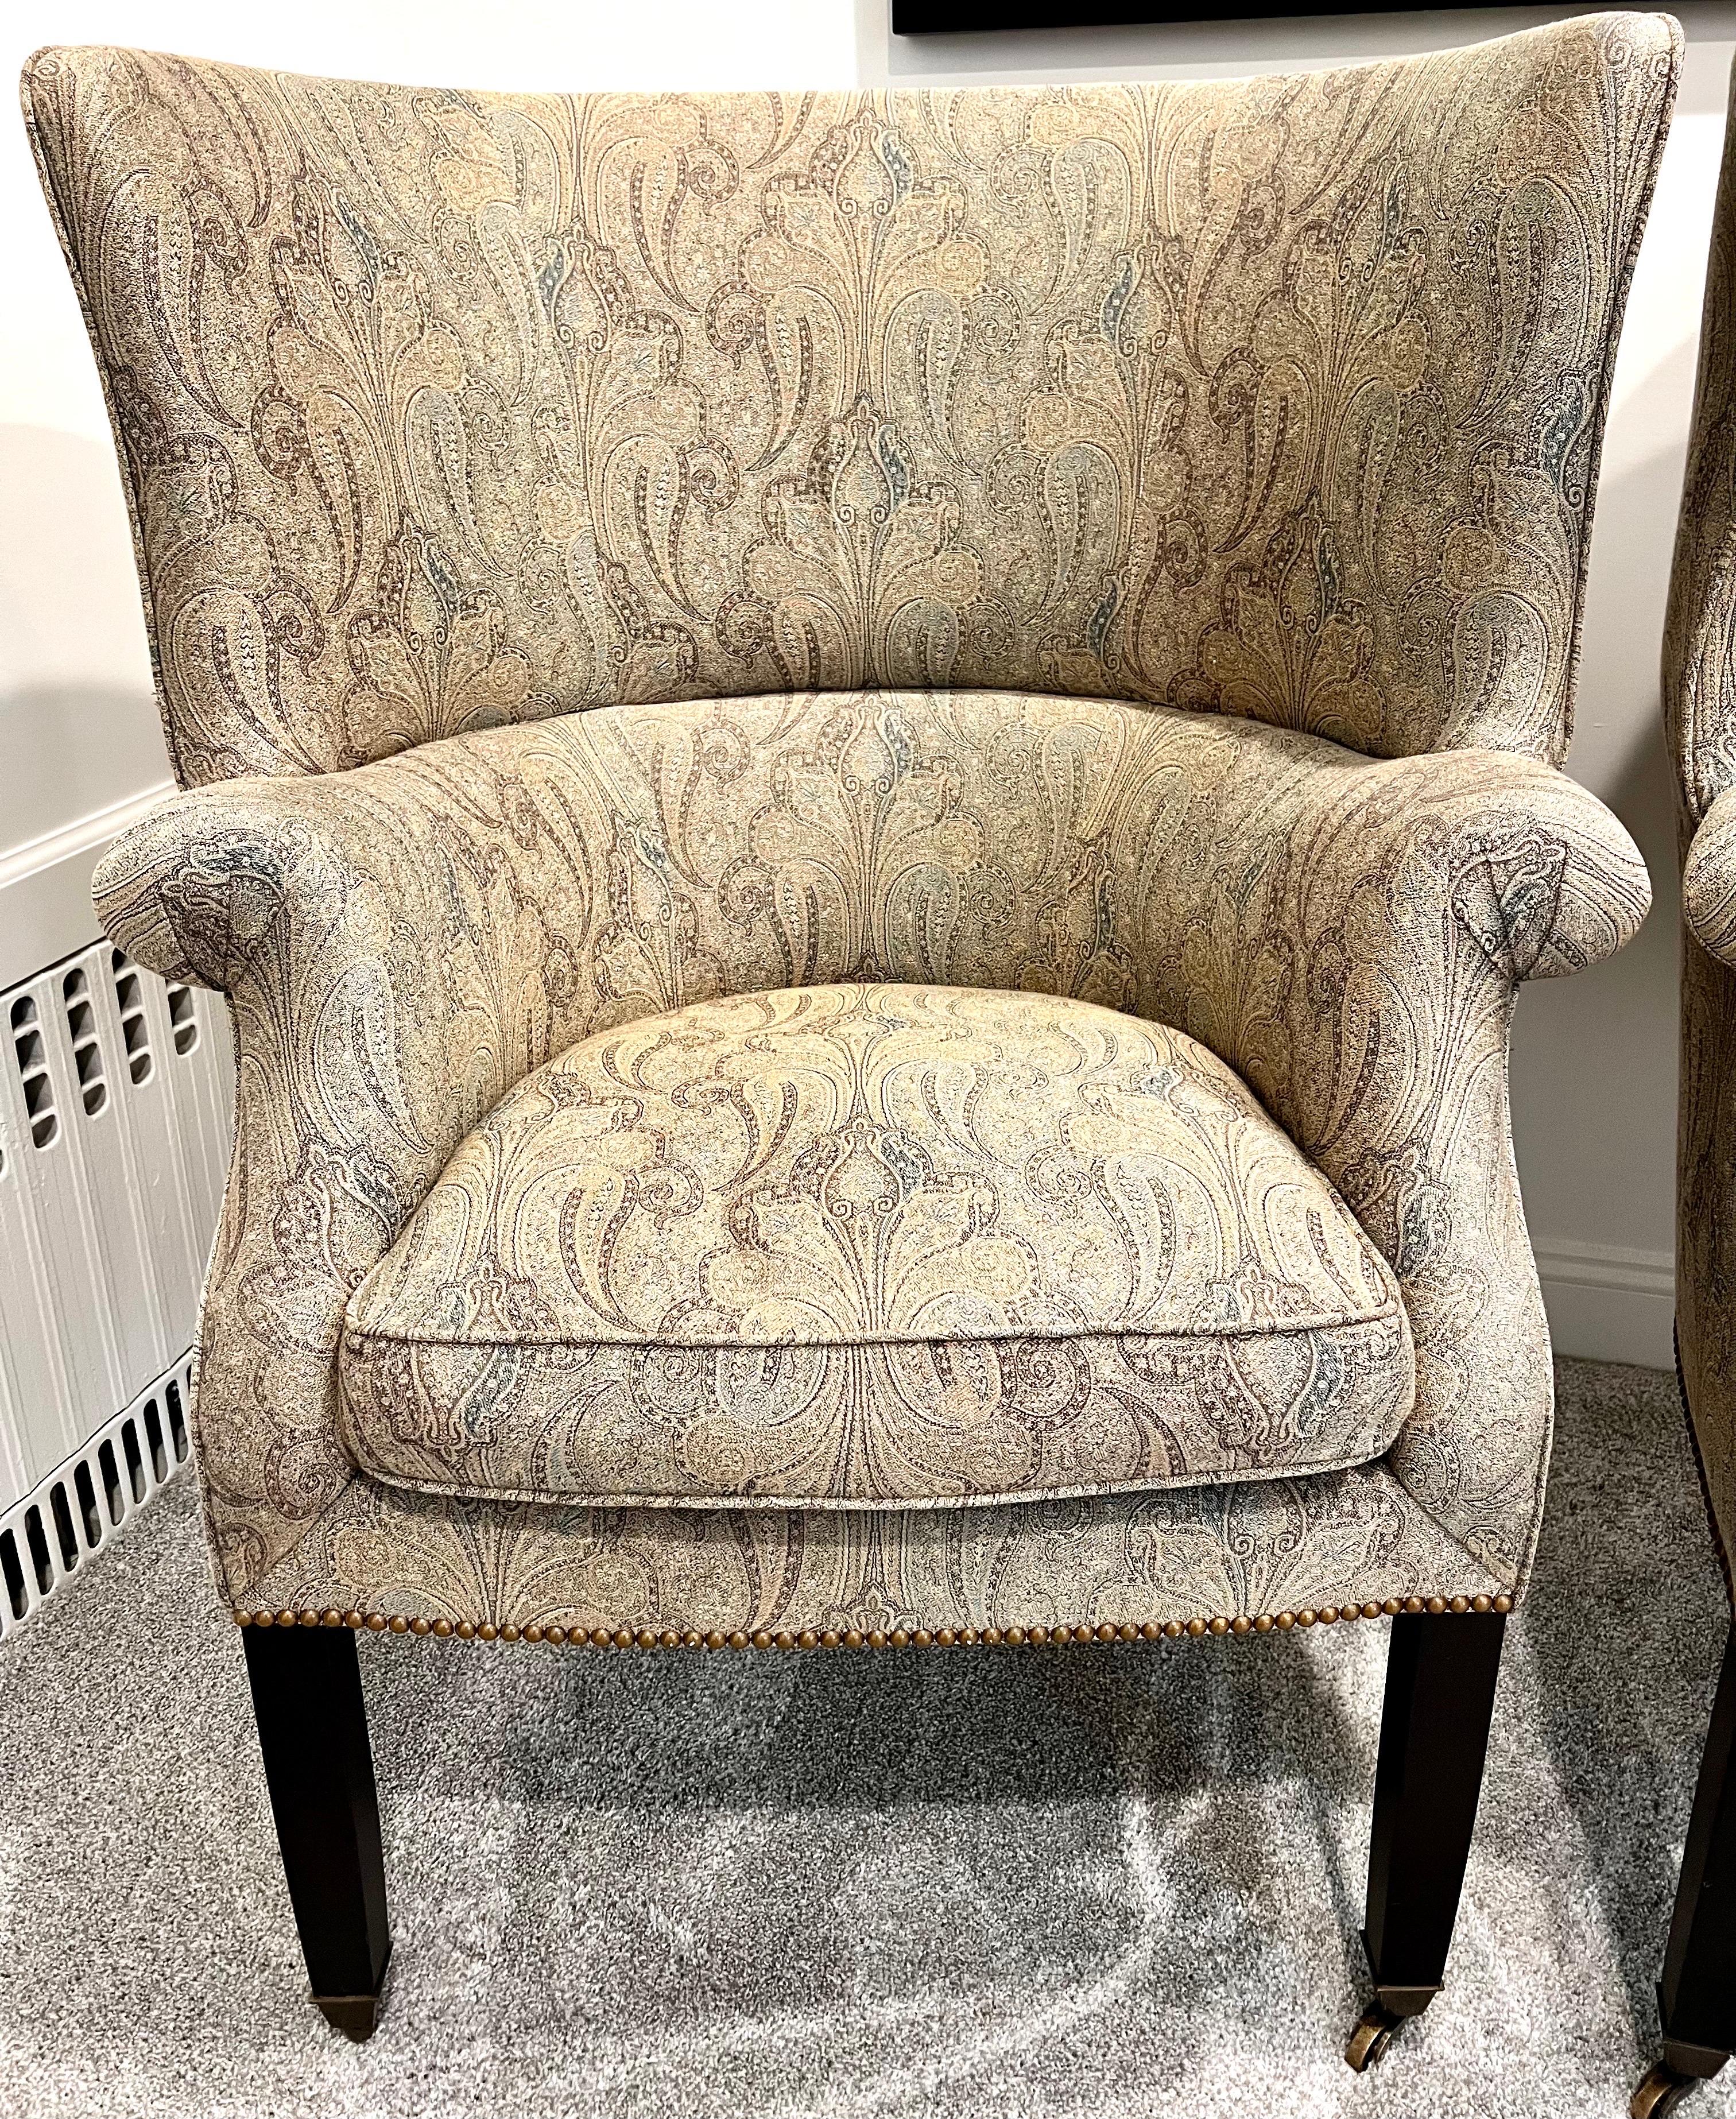 Beautiful pair of Wainscott wingback chairs by Victoria Hagan upholstered in paisley print in muted tan, olive and gray. They feature a wider wing profile and brass nailheads all around. Down seat cushion adds extra comfort.